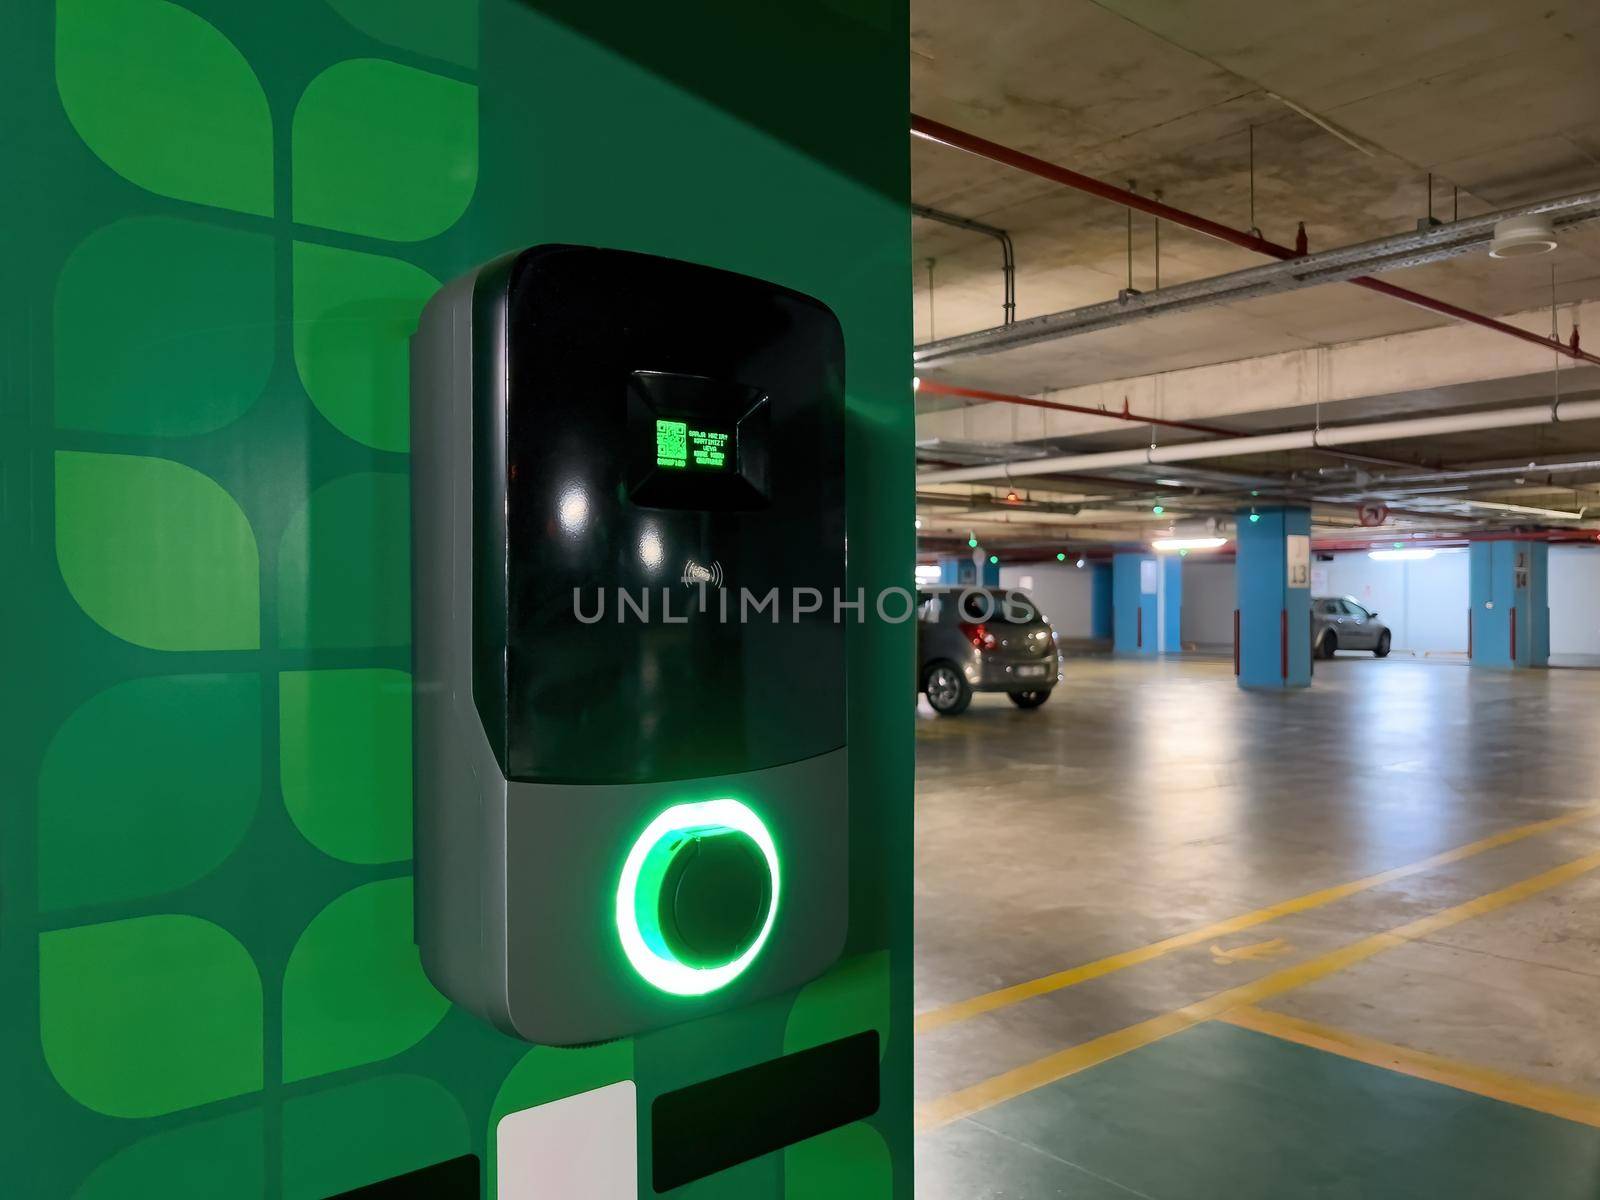 Electric car charging station in the indoor parking lot of the shopping mall by Sonat